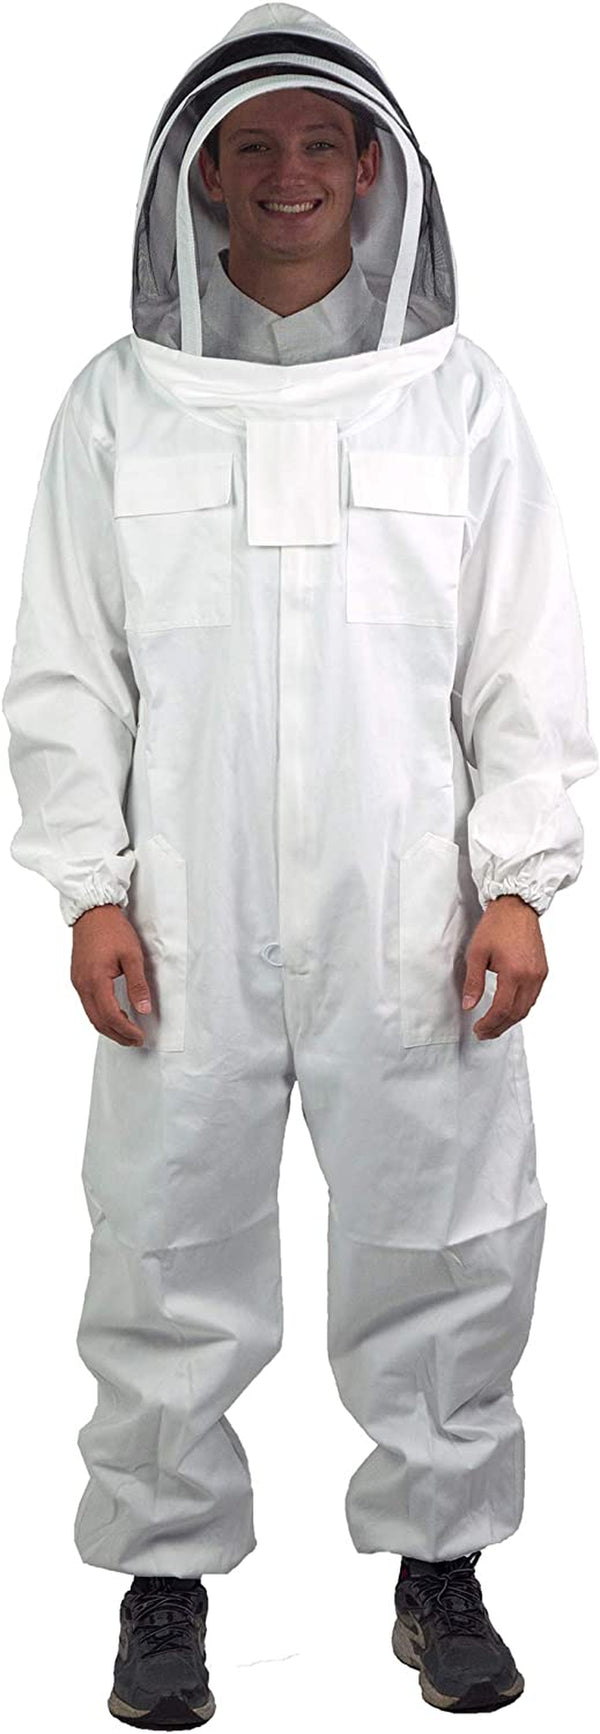 VIVO Professional Small Cotton Full Body Beekeeping Suit with Veil Hood (BEE-V106S)